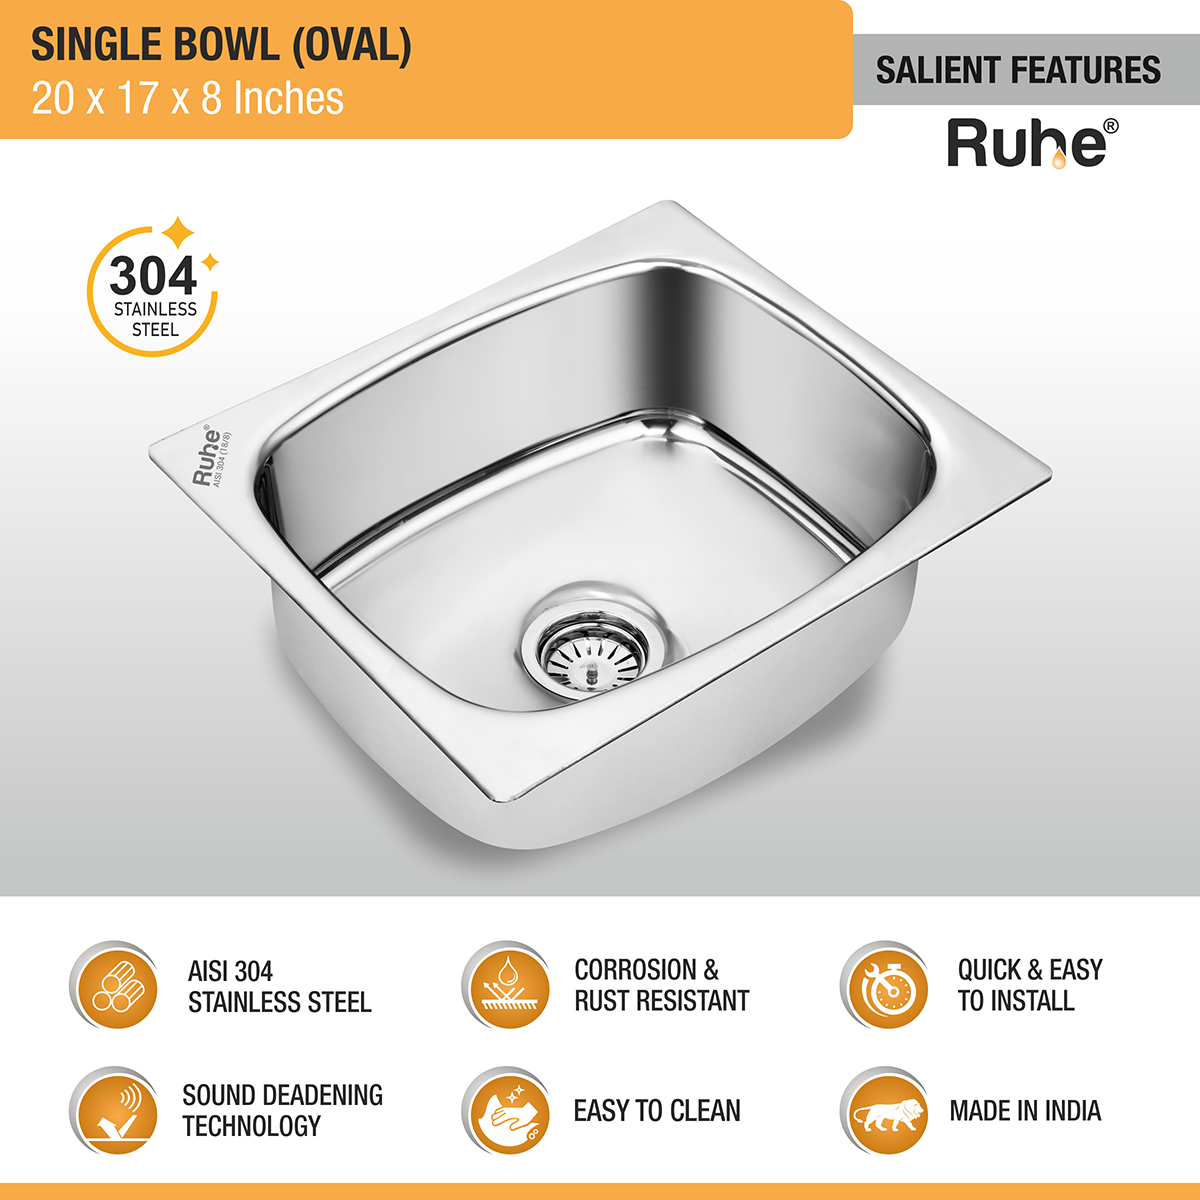 Oval Single Bowl (20 x 17 x 8 inches) 304-Grade Kitchen Sink features and benefits